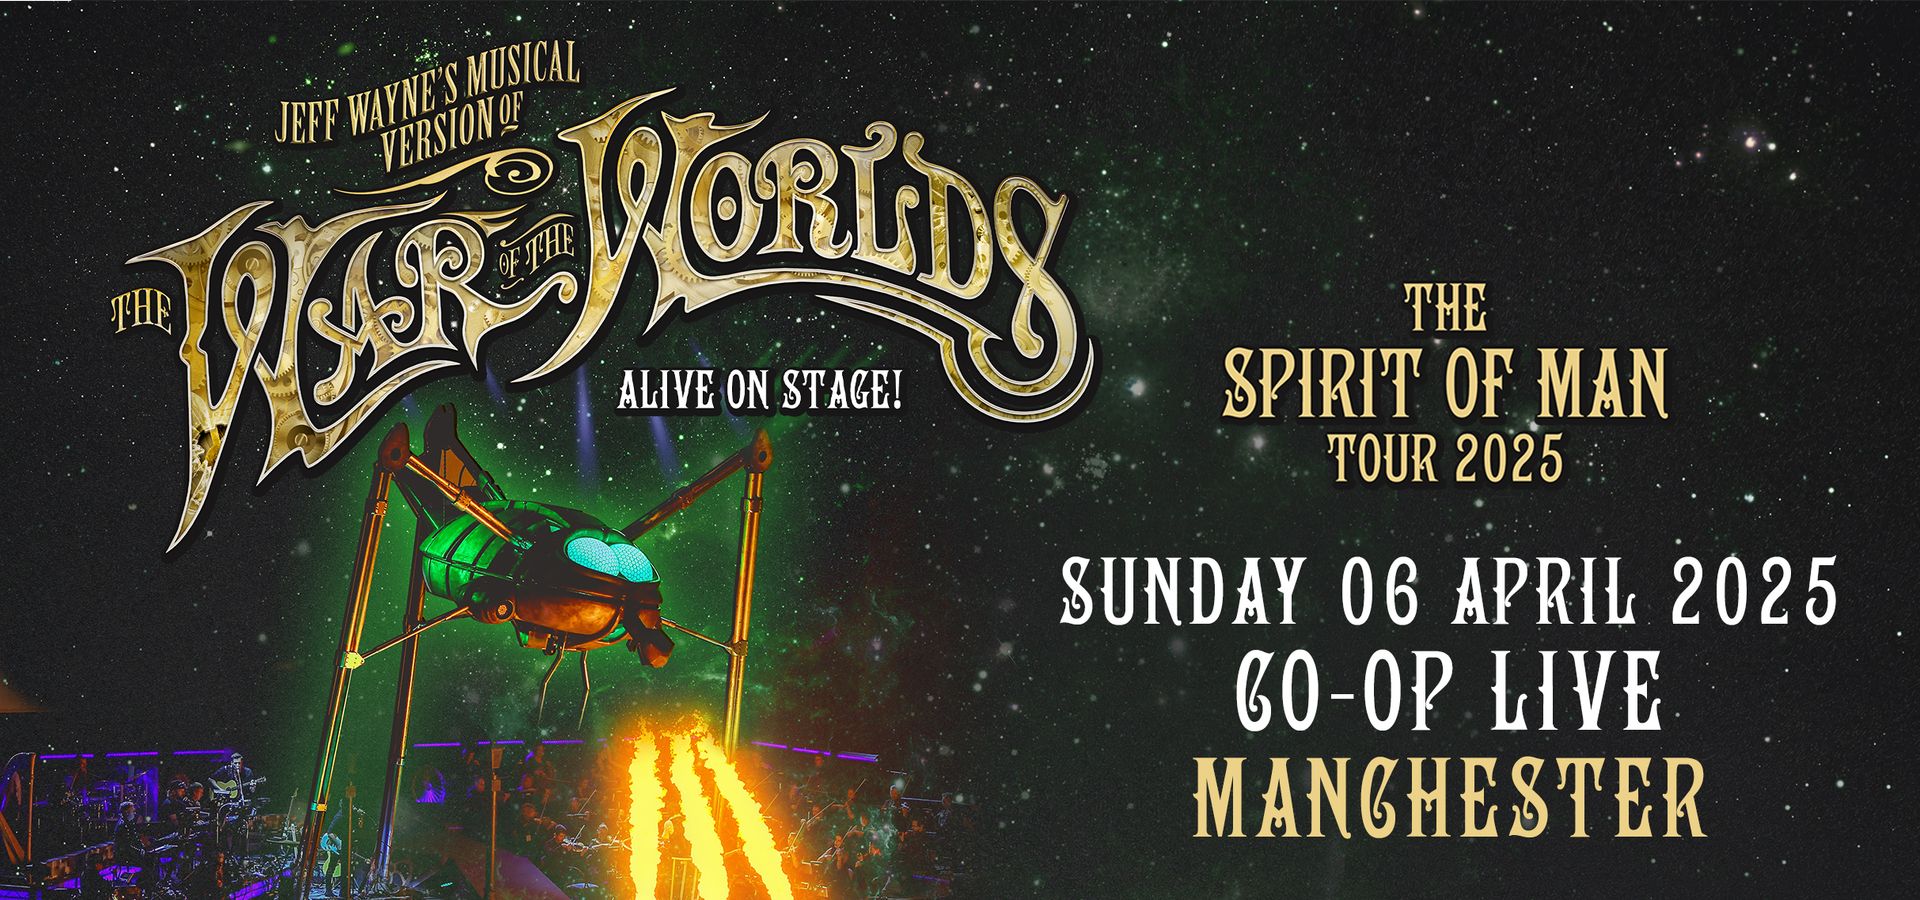 war of the worlds tour 2023 tickets price